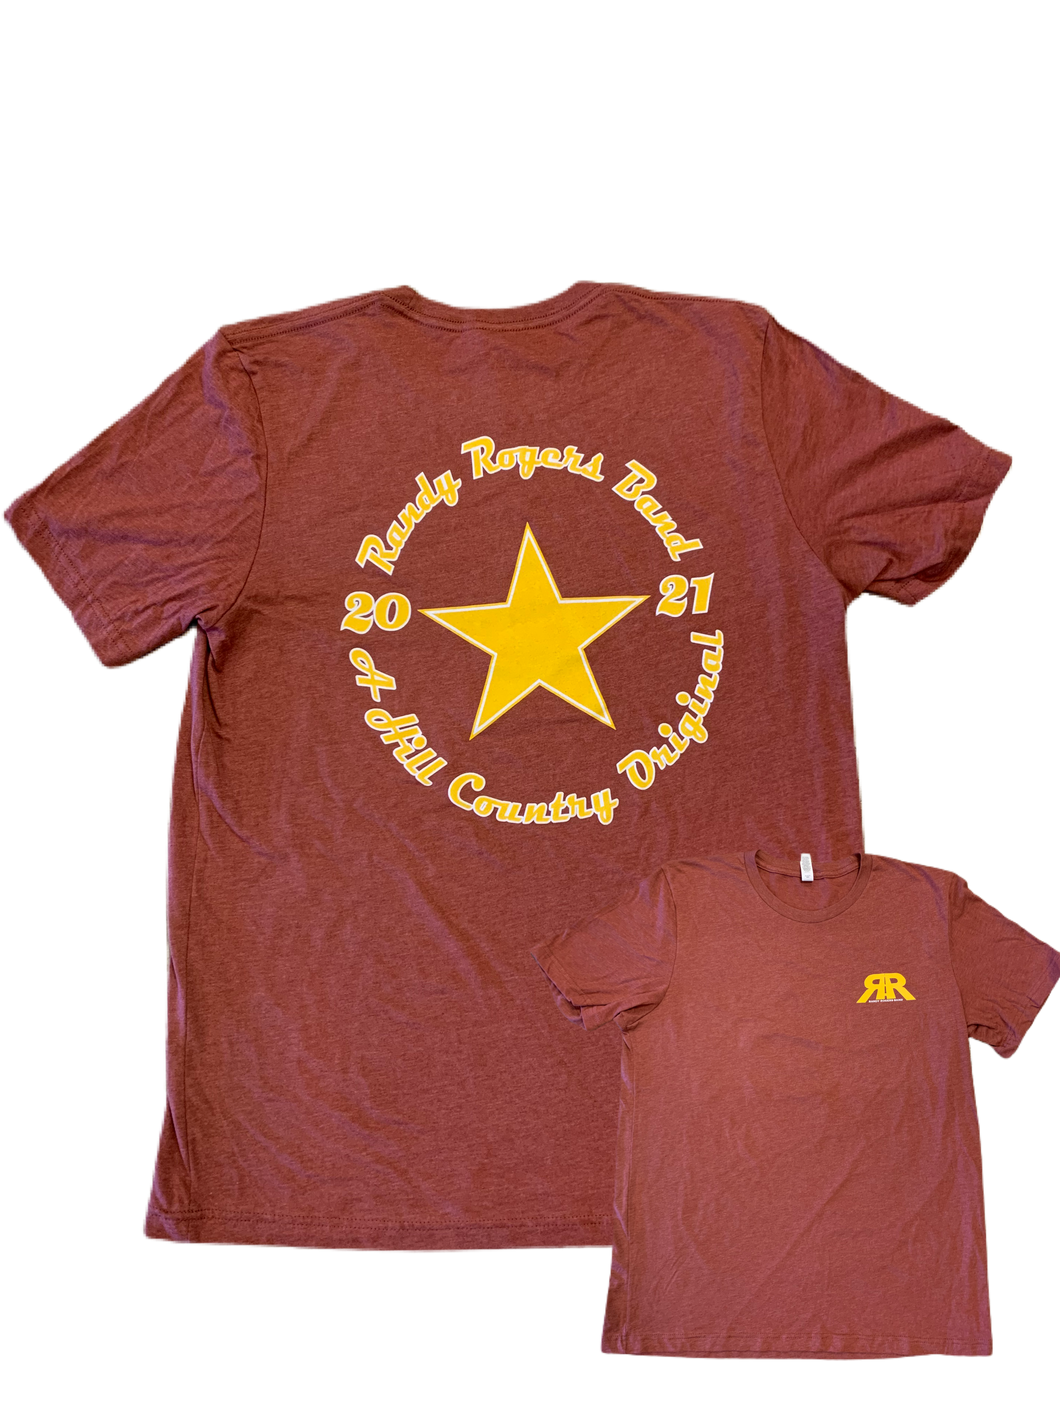 SALE! Hill Country Original Tee 2021